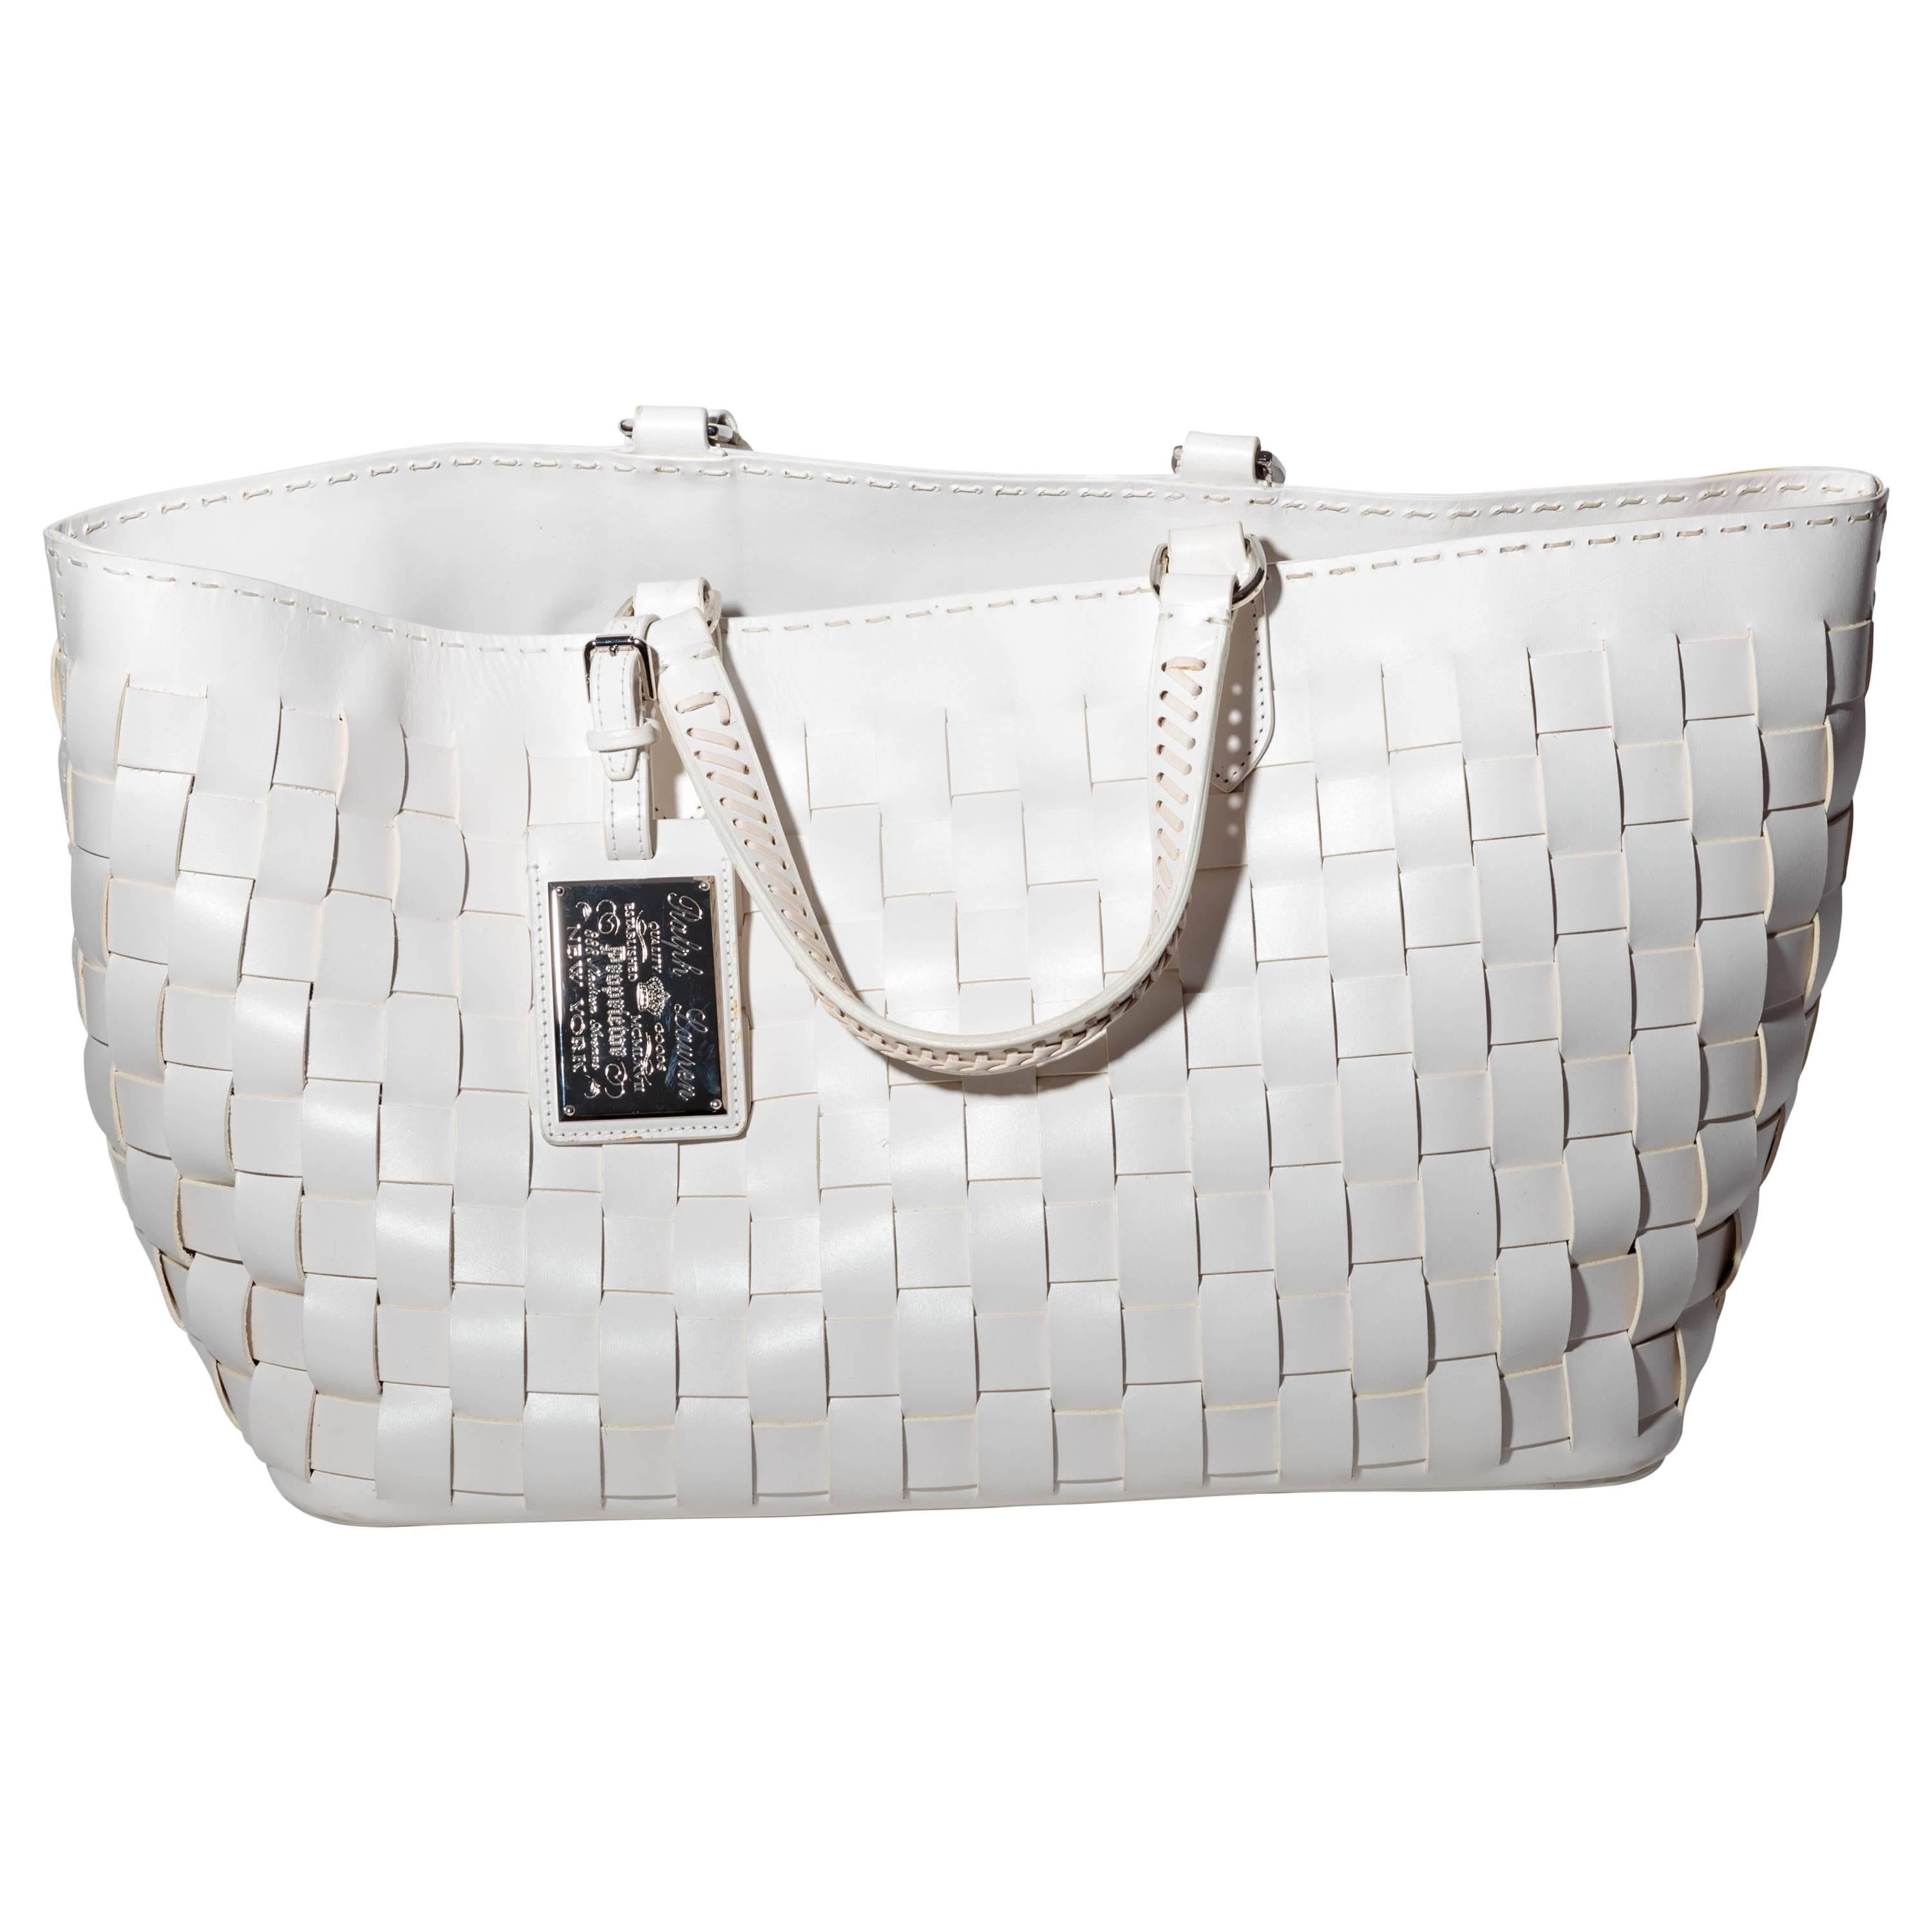 Ralph Lauren White Leather Tote with Detachable Shoulder Strap